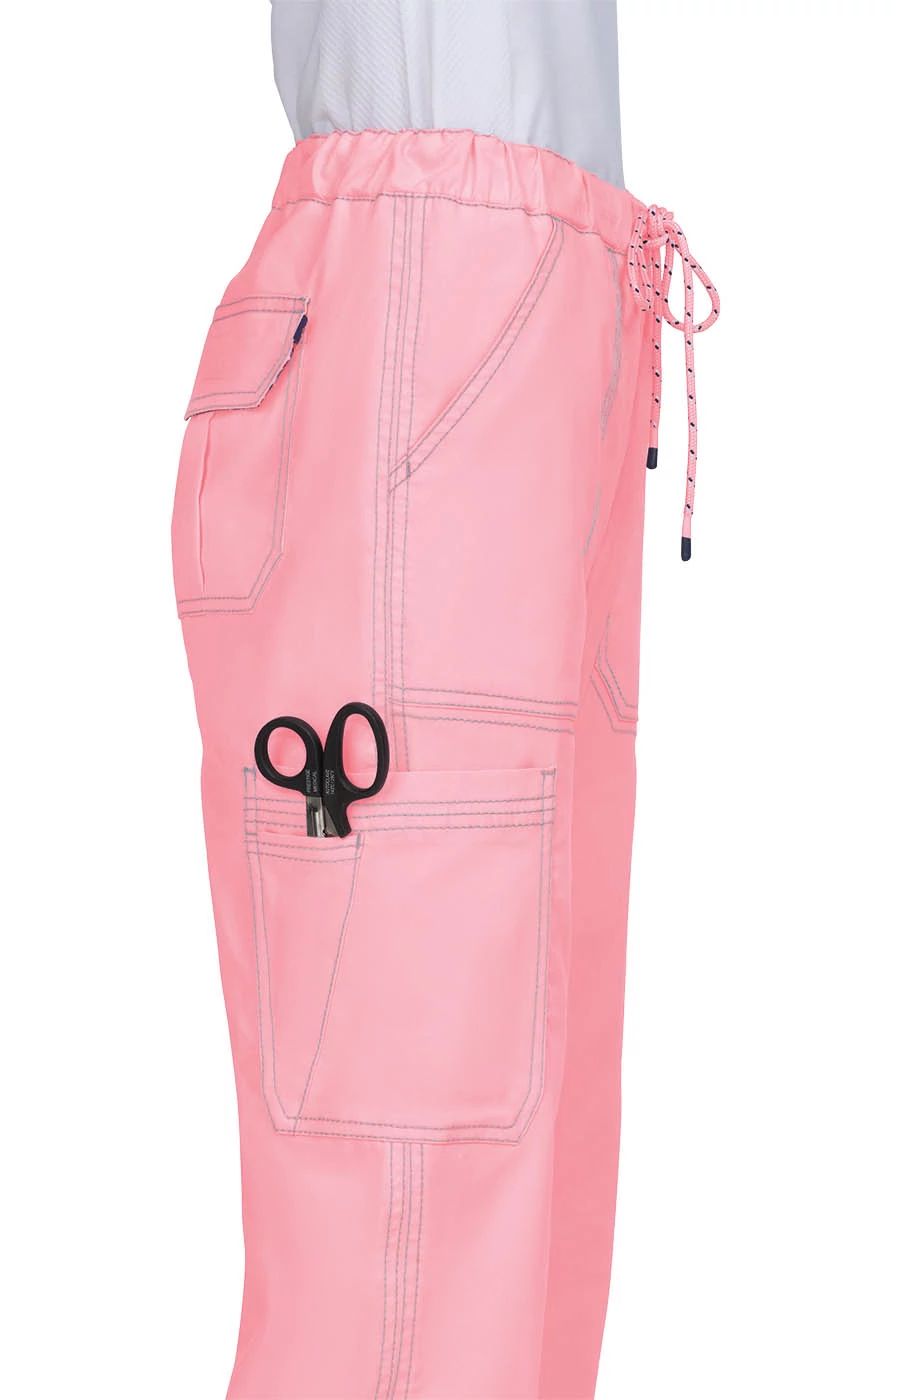 stretch-giana-jogger-sweet-pink